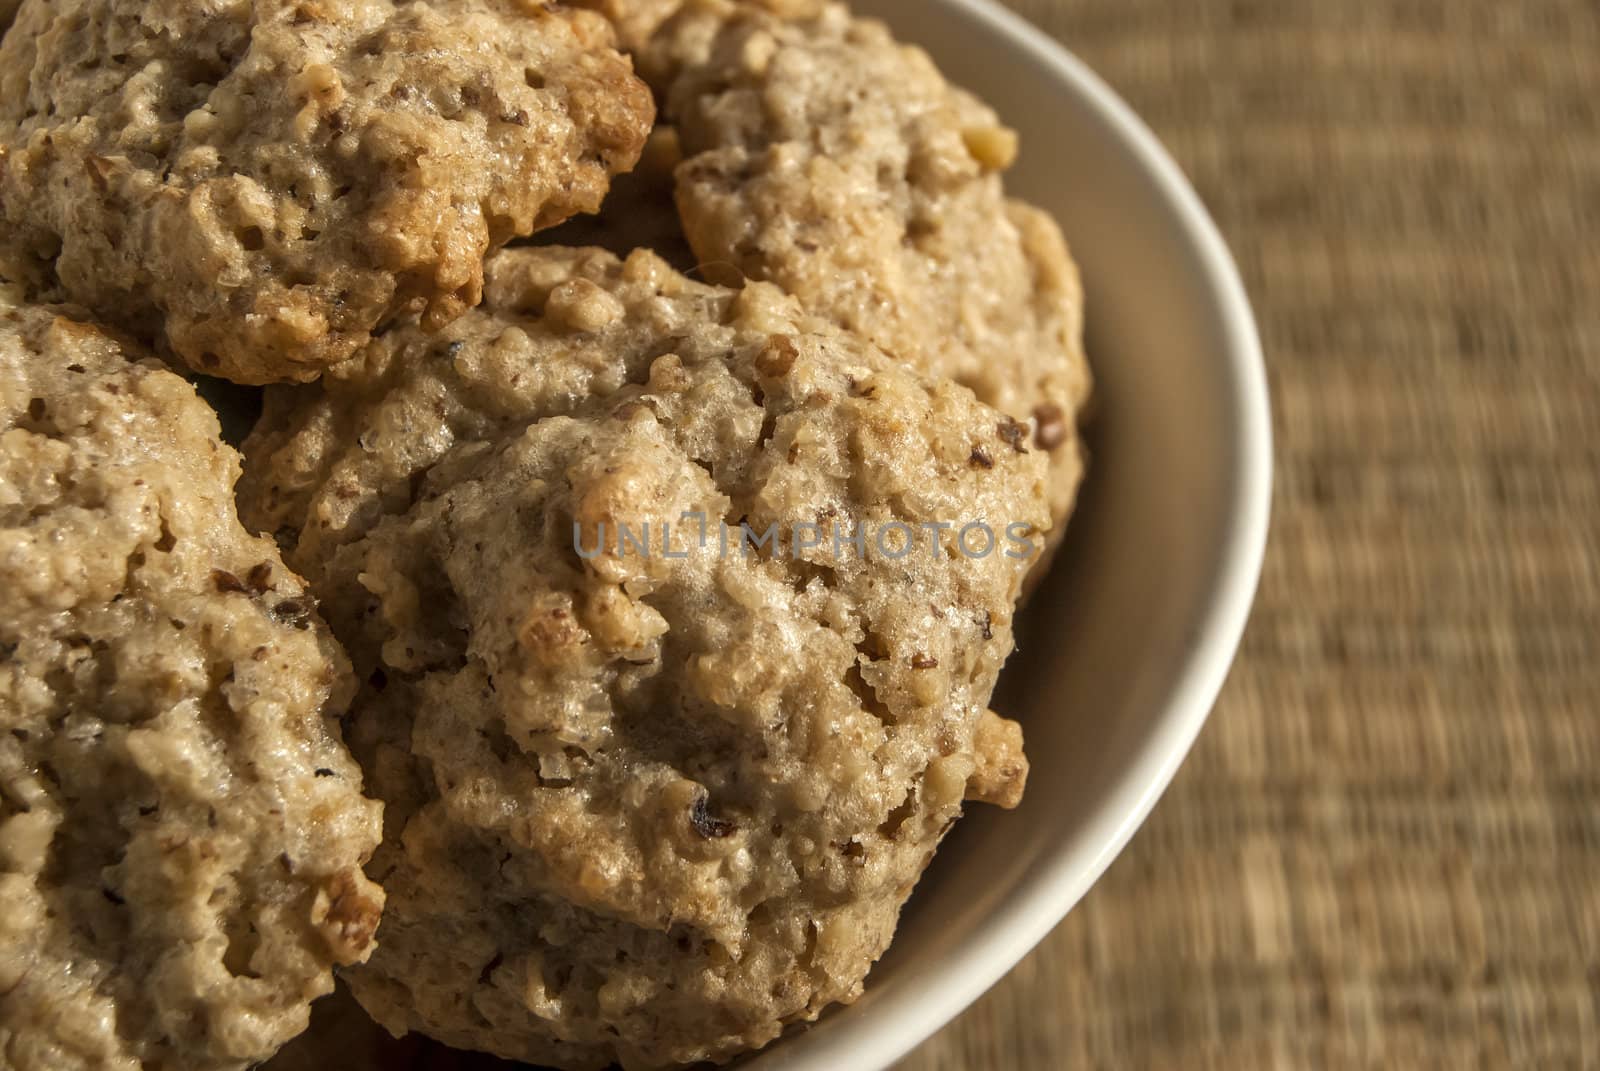 Homemade oatmeal cookies in bowl on reed mat closeup